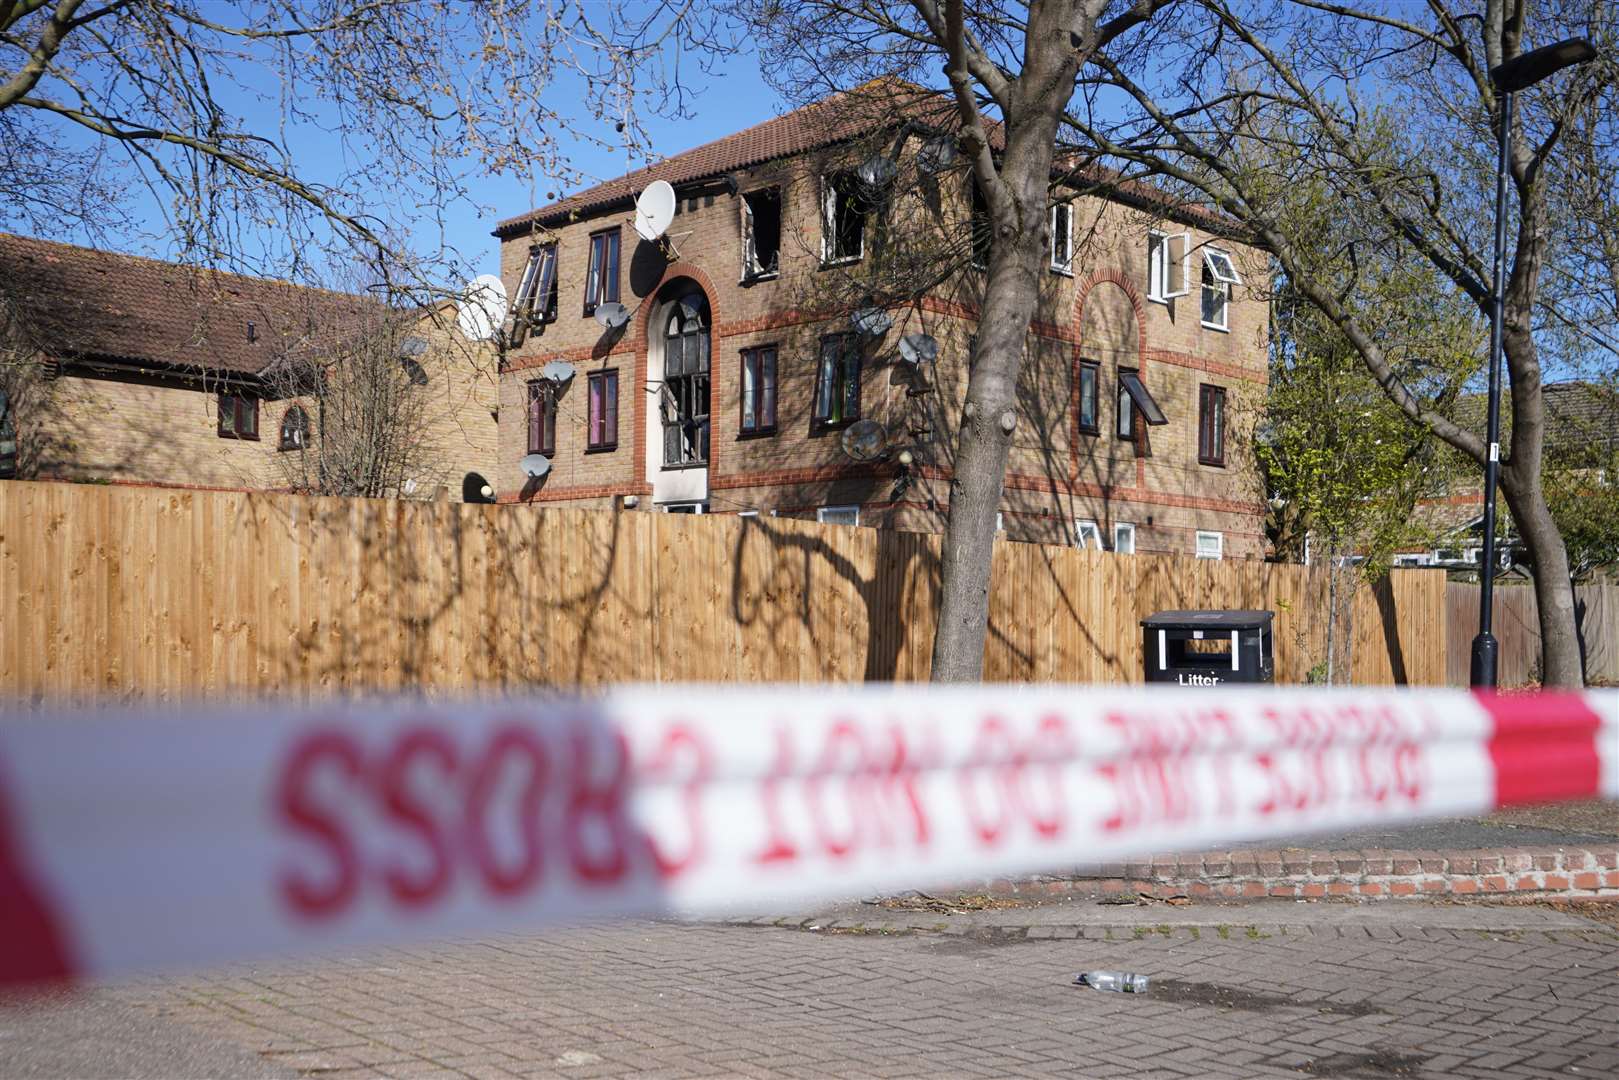 The scene on Tollgate Road in Beckton, Newham after a fire at a block of flats. A man has been arrested on suspicion of murder after one person, believed to be a woman, died in the blaze. Picture date: Friday April 7, 2023.